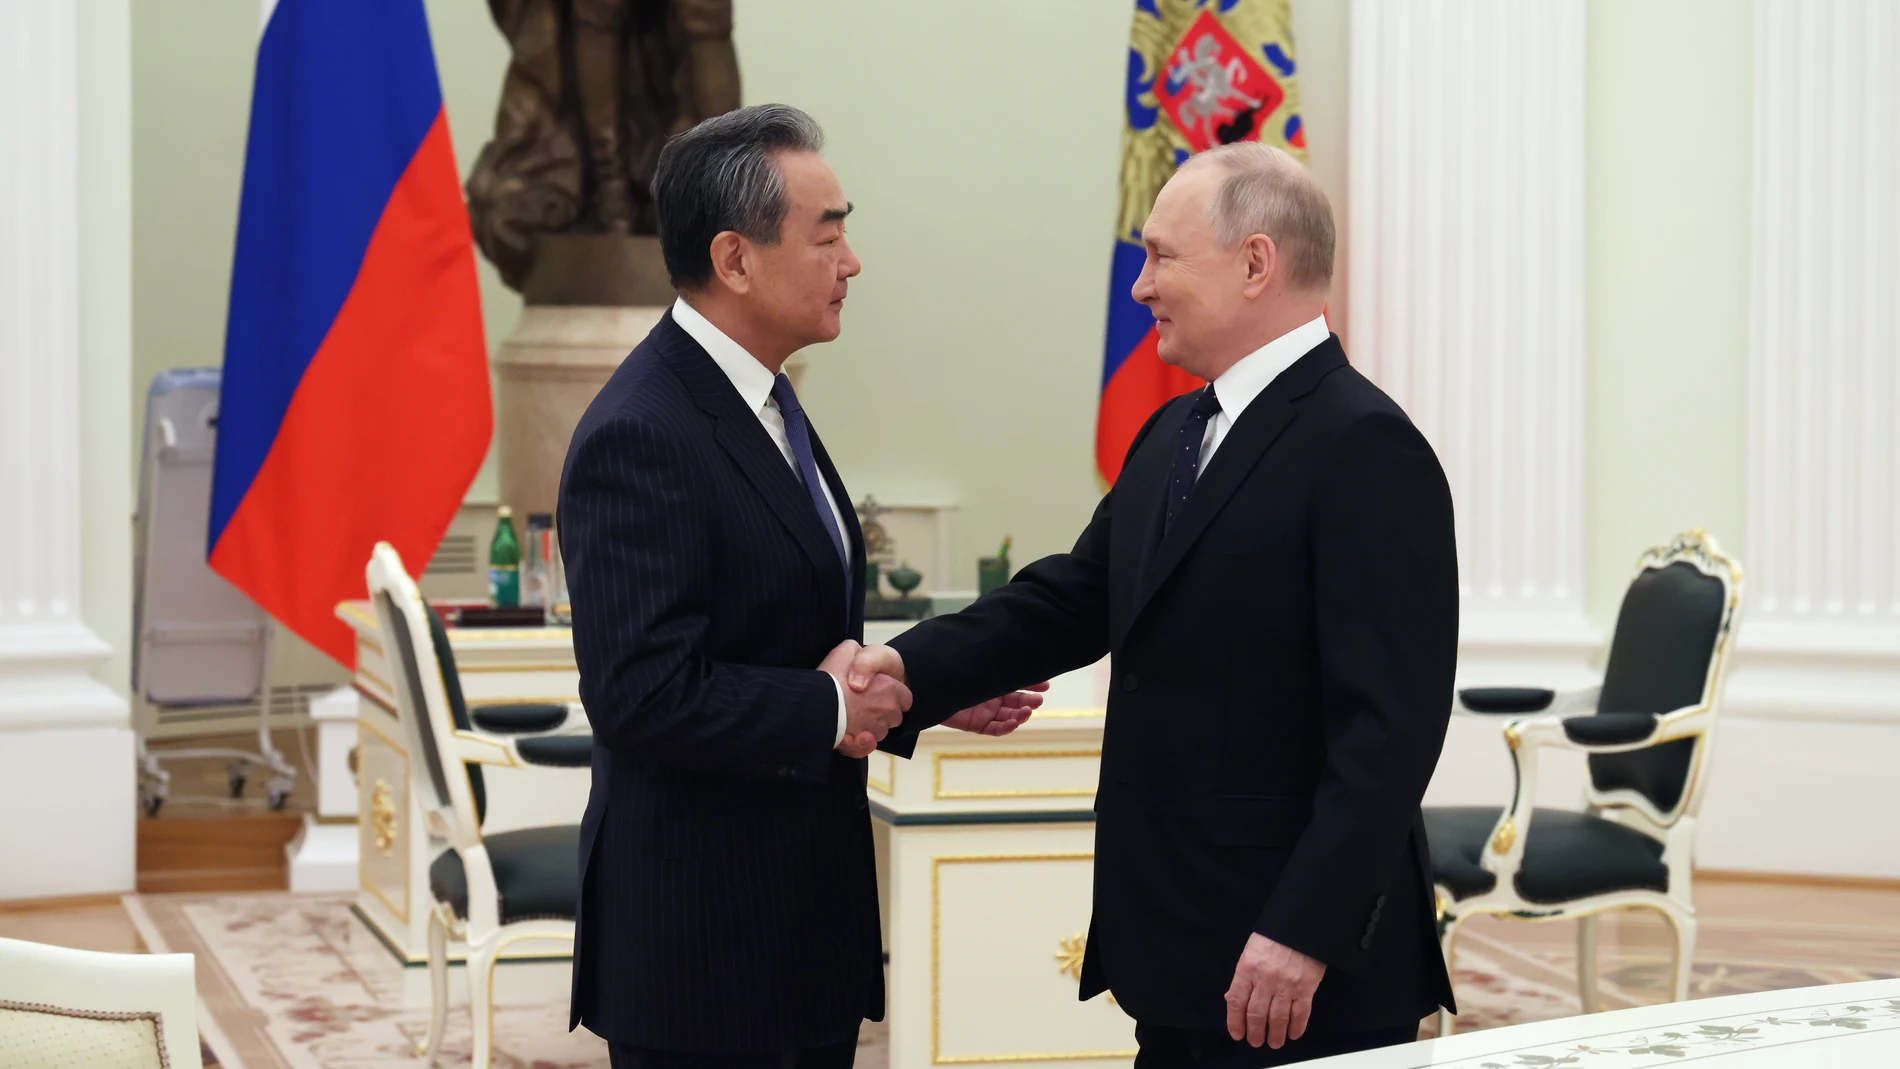 Moscow (Russian Federation), 21/02/2023.- Russian President Vladimir Putin (R) shakes hands with China's Director of the Office of the Central Foreign Affairs Commission Wang Yi during their meeting in the Kremlin, in Moscow, Russia, 22 February 2023. (Rusia, Moscú) EFE/EPA/ANTON NOVODEREZHKIN/SPUTNIK/KREMLIN / POOL MANDATORY CREDIT 